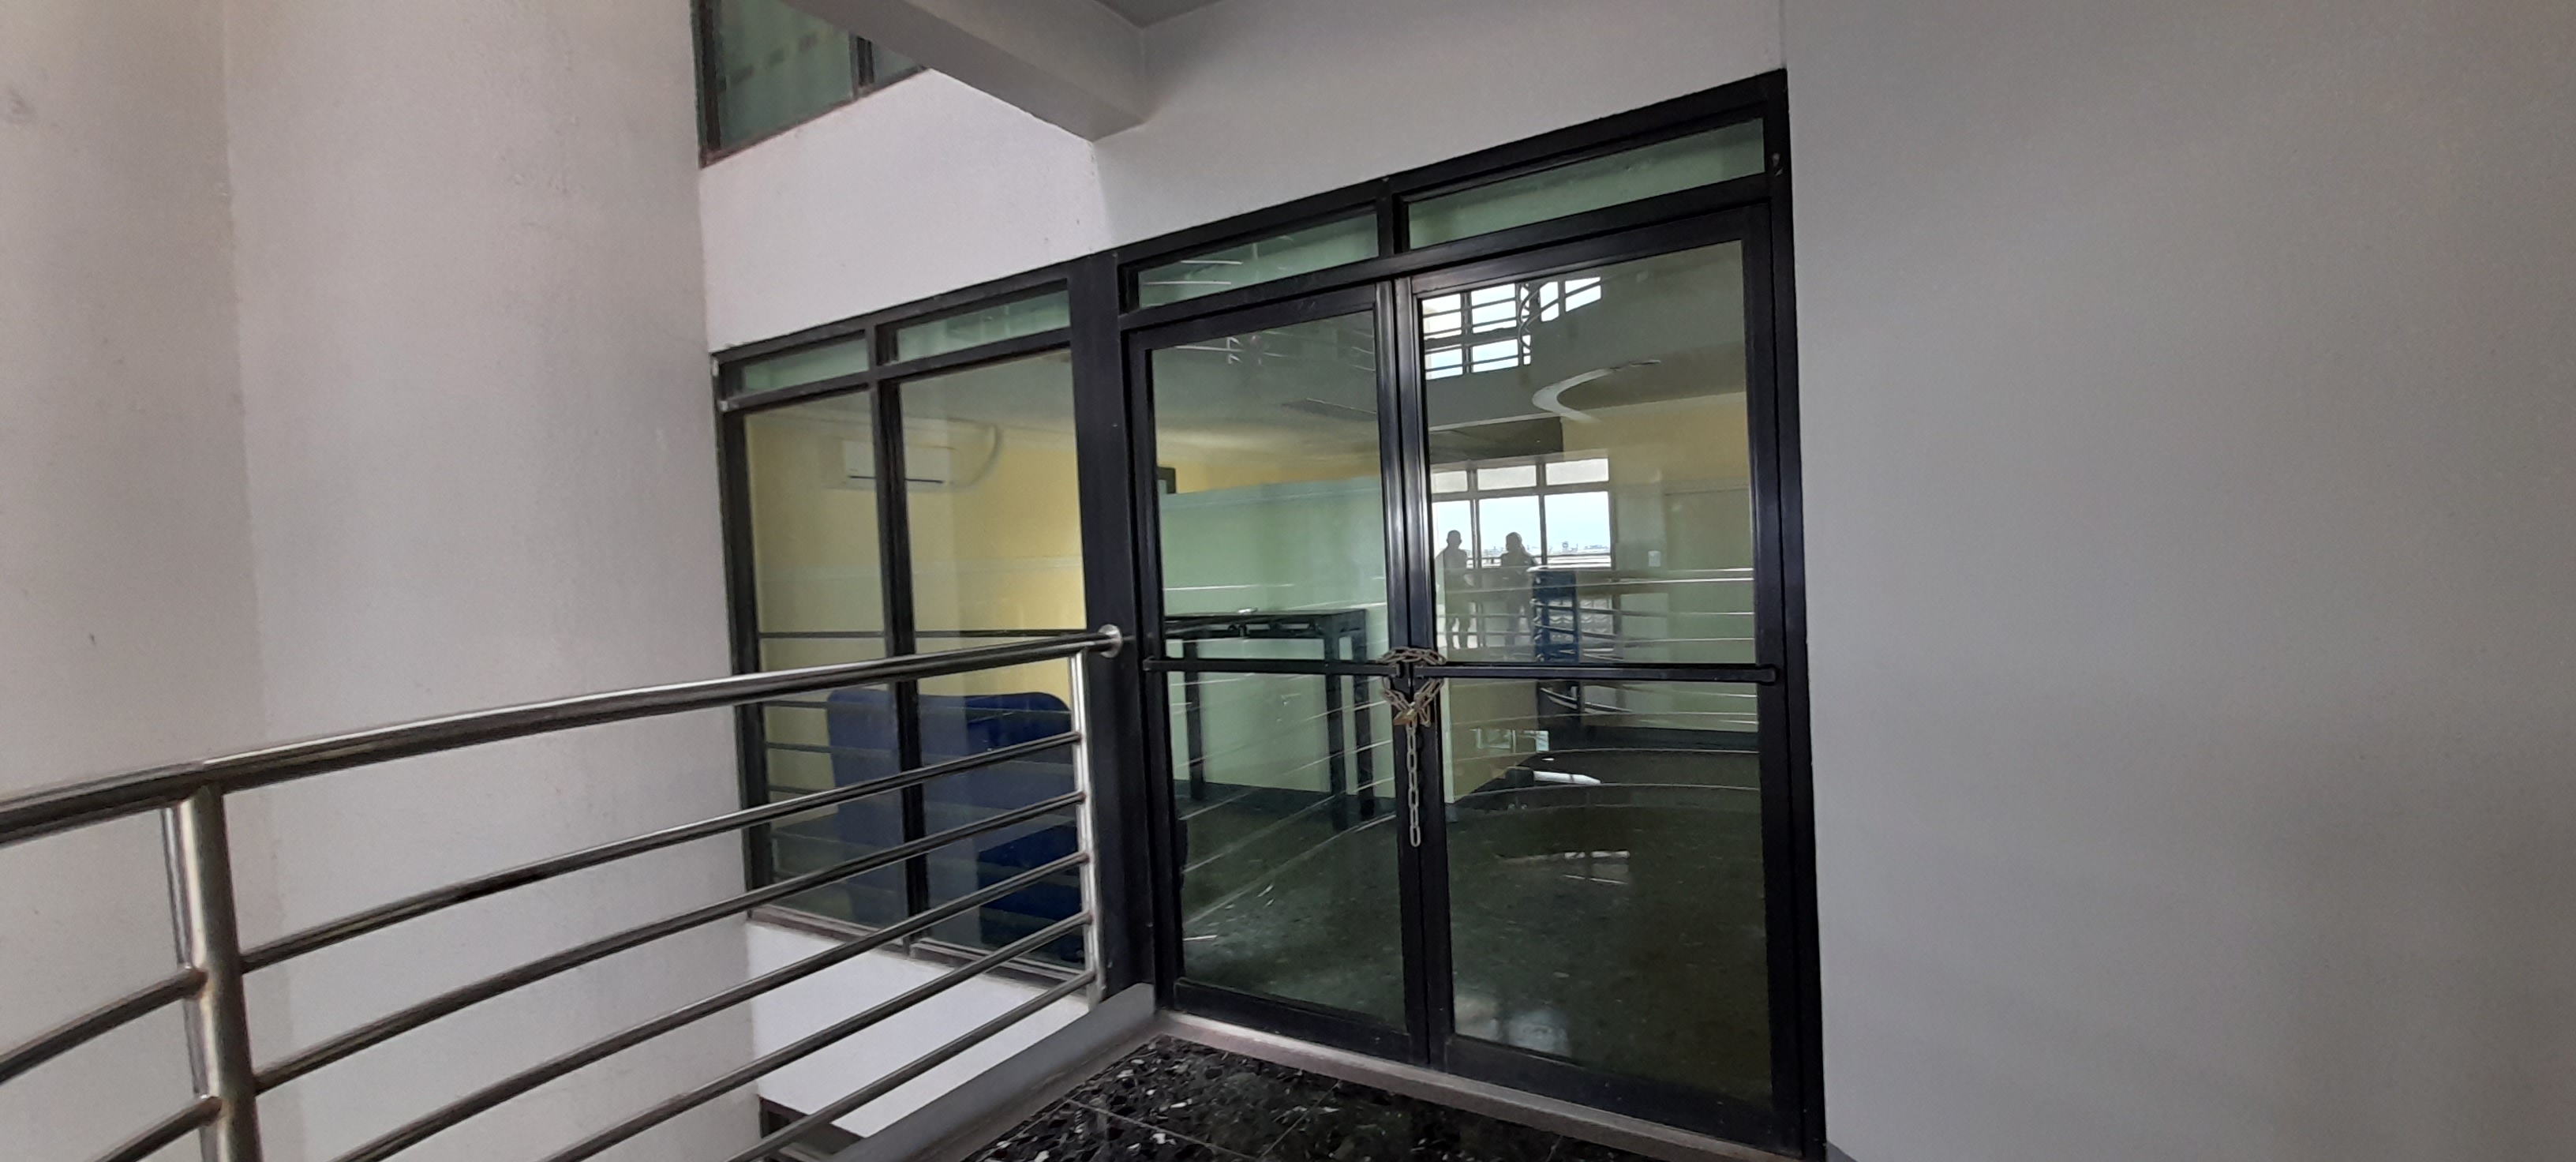 210-square-meters-office-with-cubicles-near-sm-city-nra-cebu-city